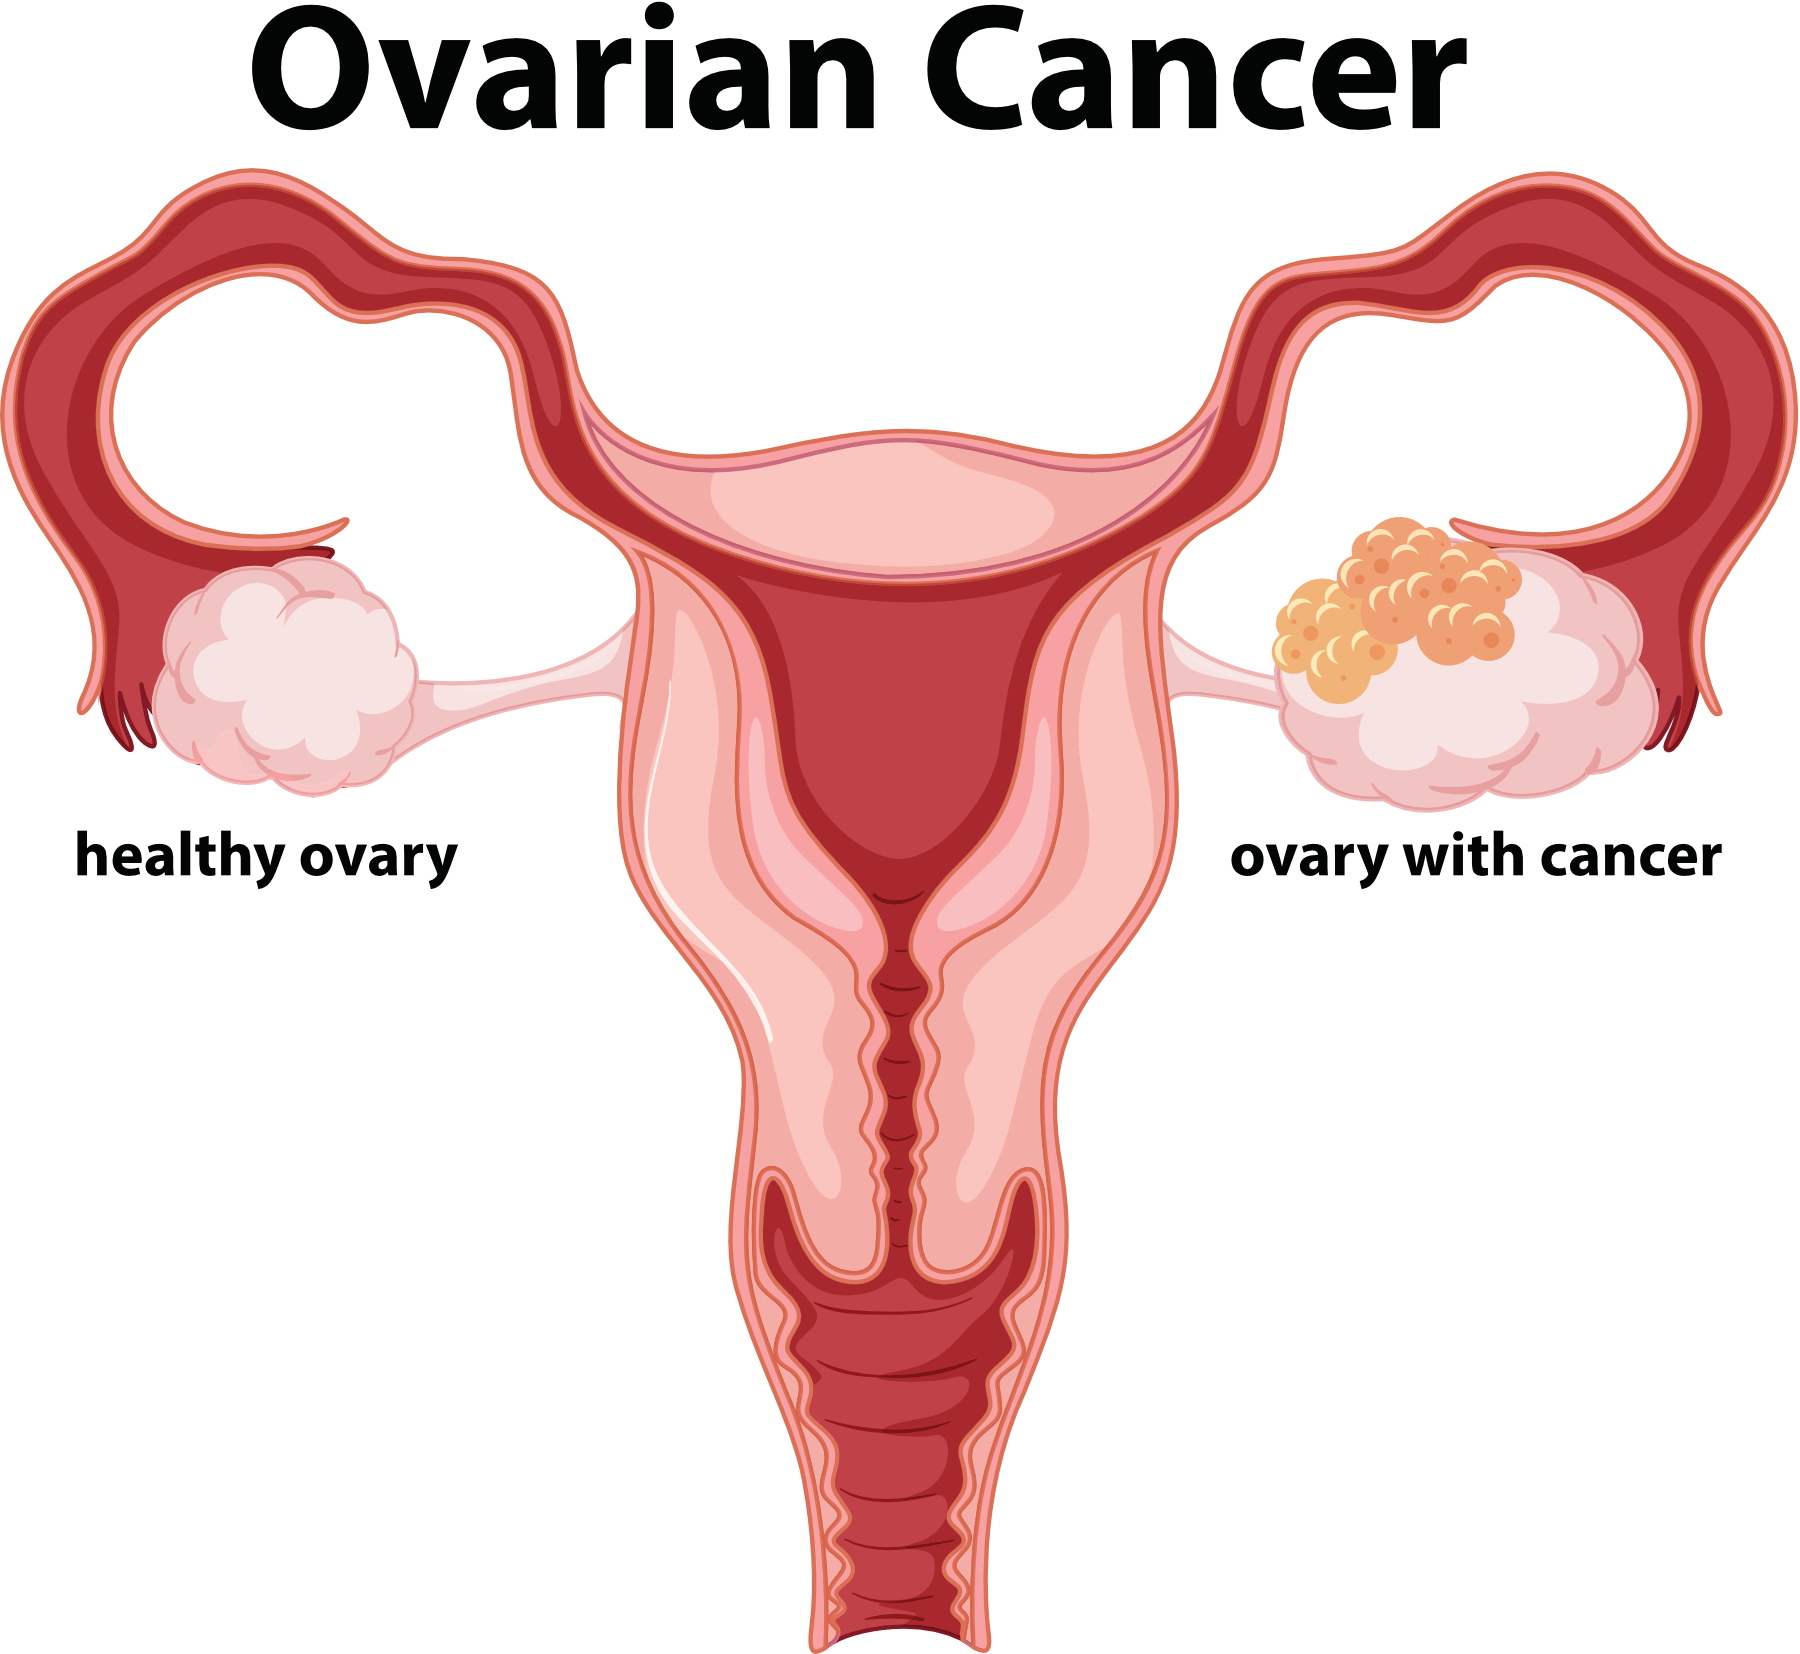 Ovarian Cancer Treatment Choices by Type and Stage